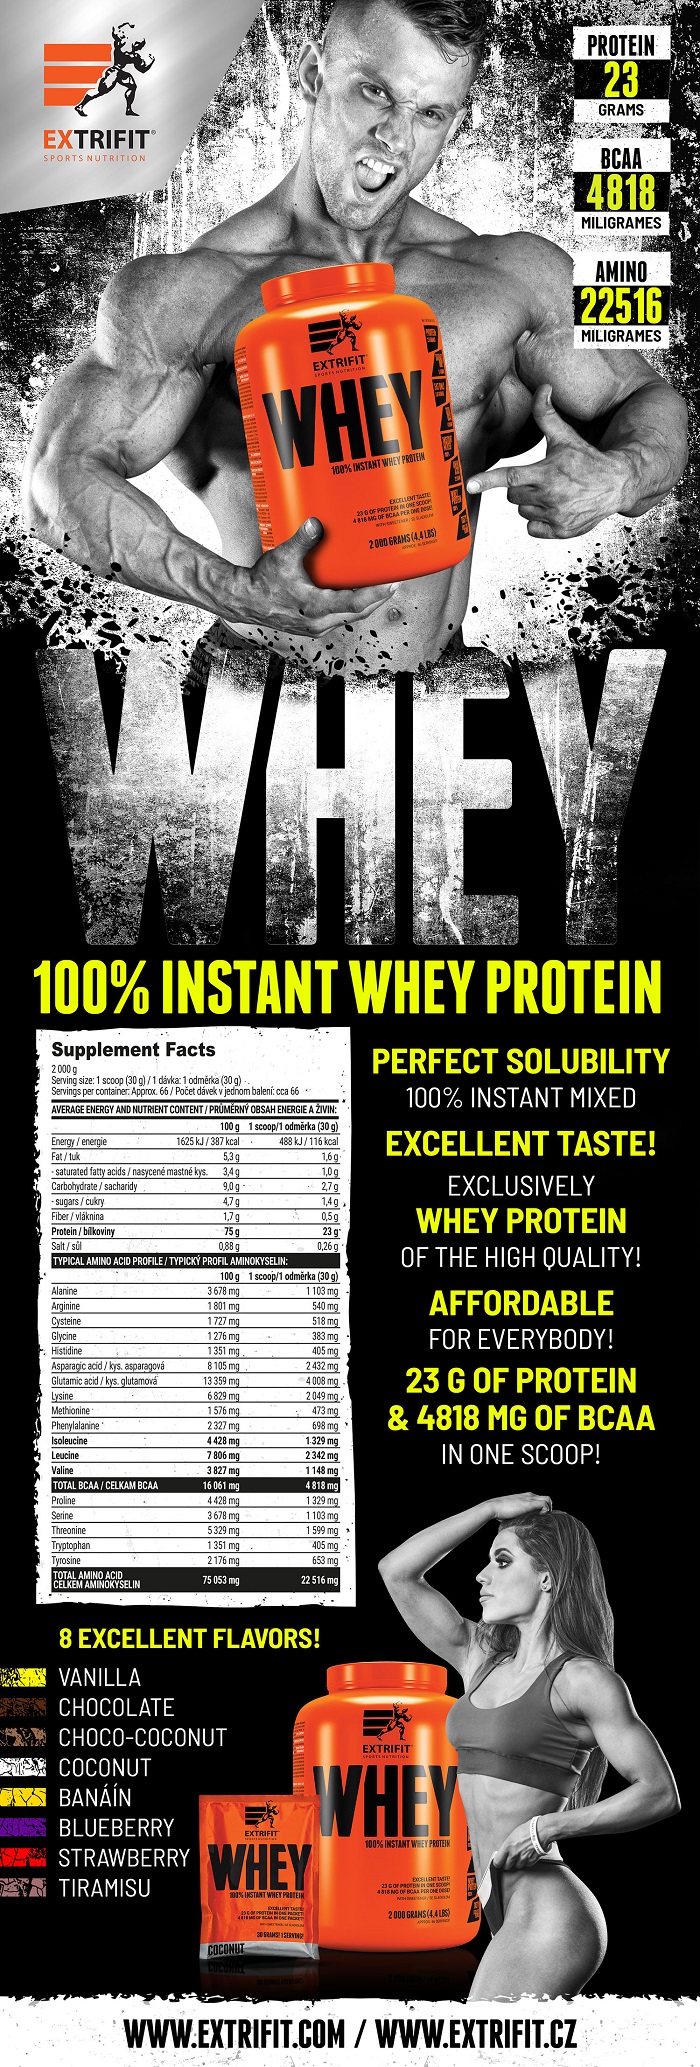 Extrifit 100% Instant Whey Protein - banner